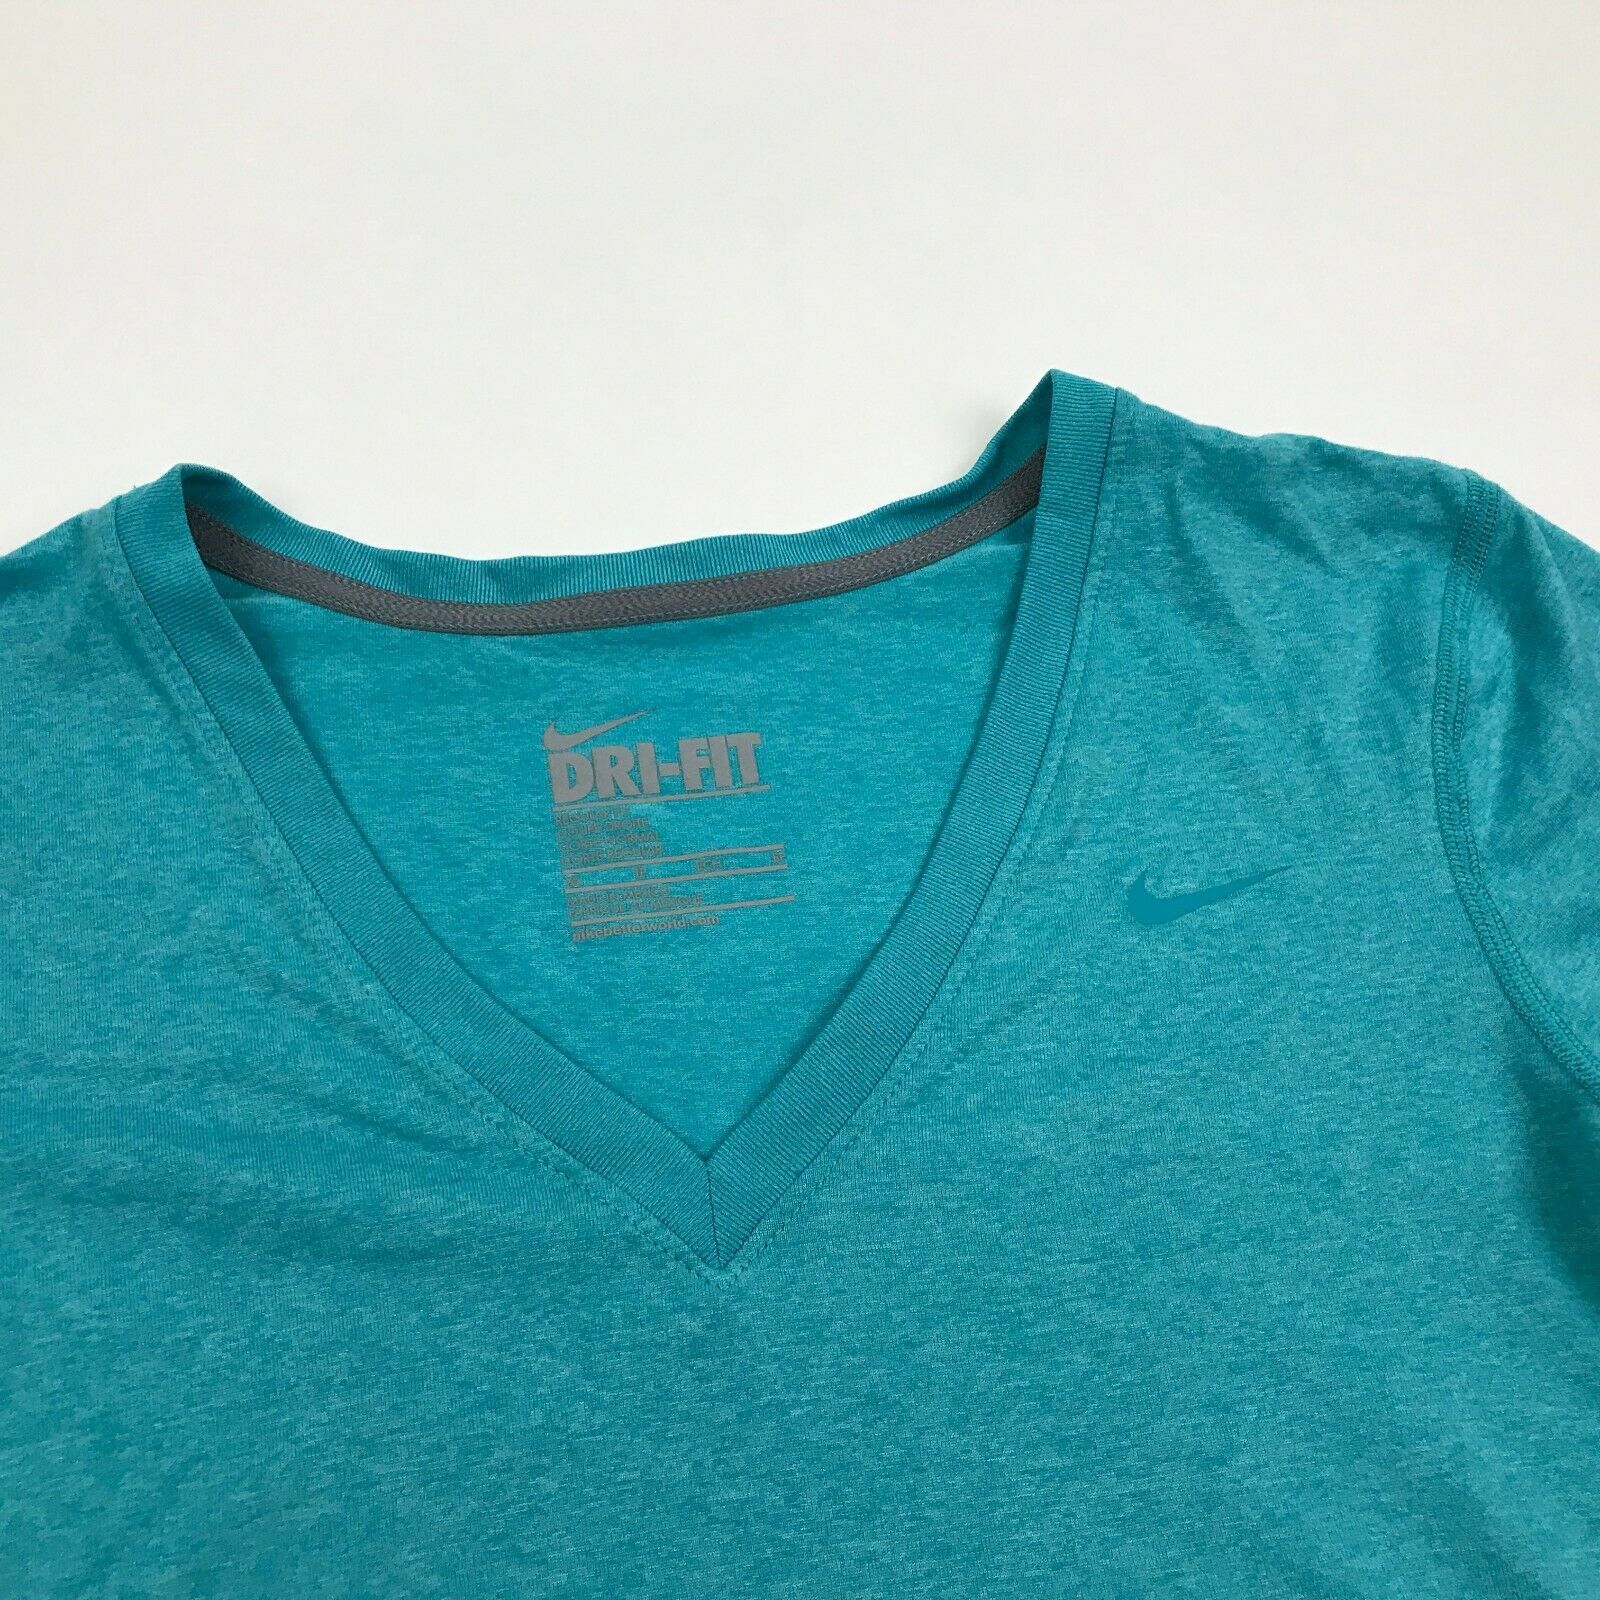 NIKE Dry Fit Shirt Women's Size XS Extra Small Turquoise Blue V-Neck ...